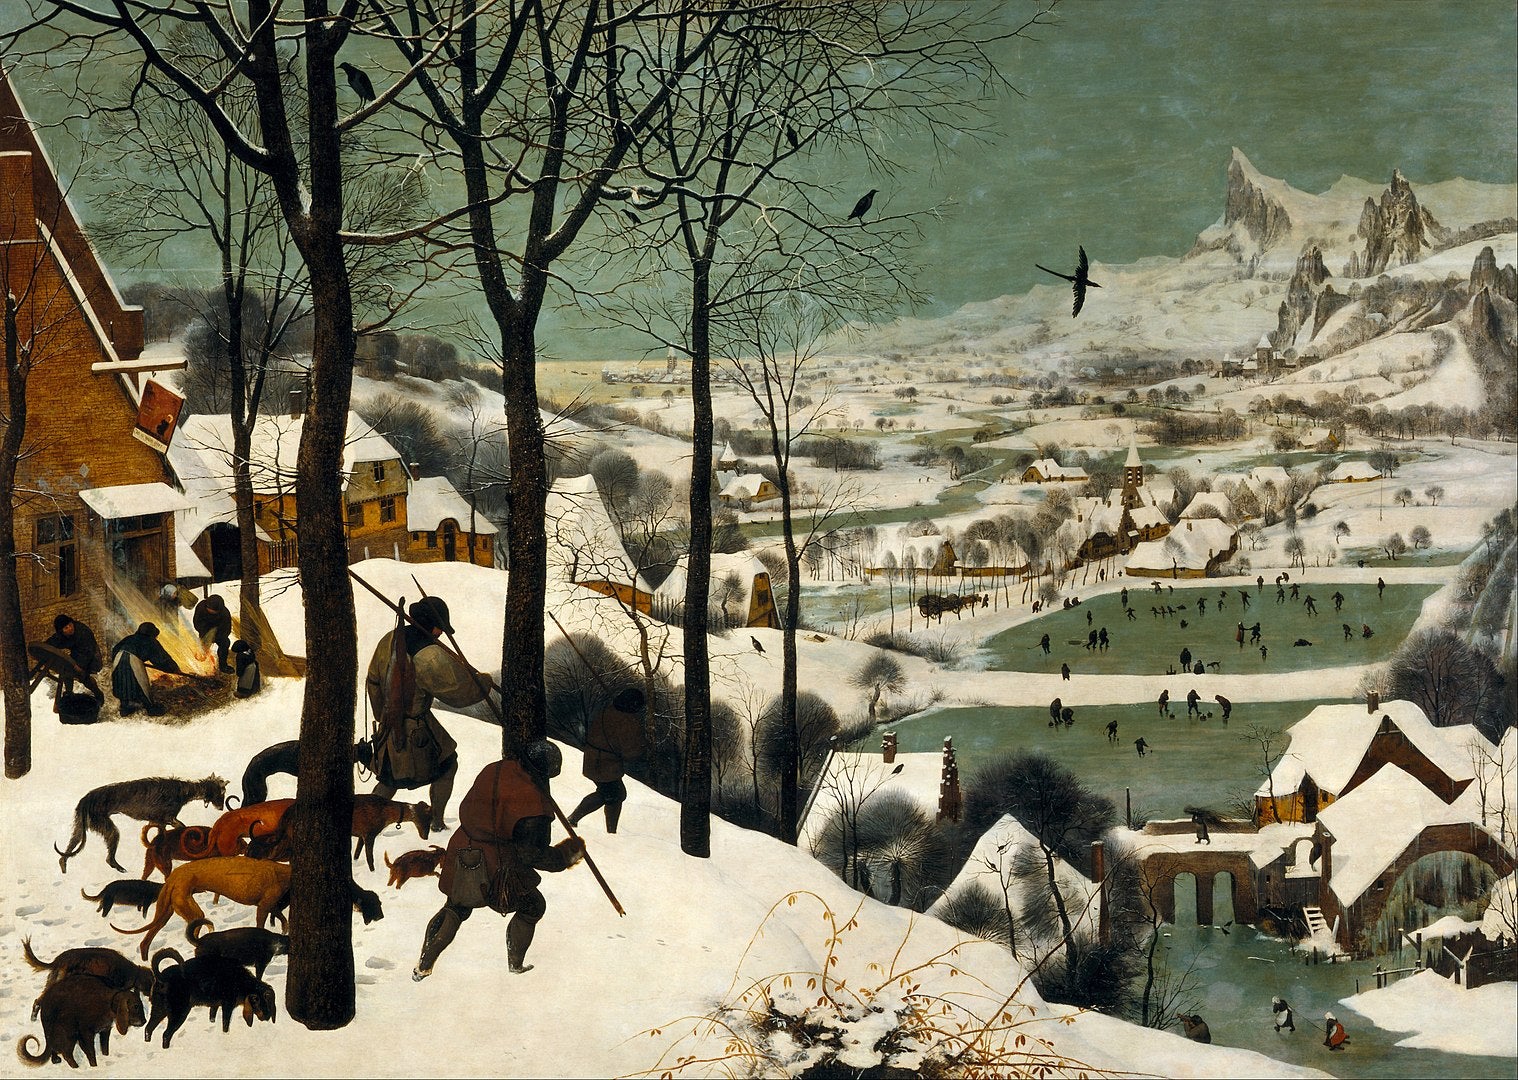 Weary hunters return from an expedition with little to show for it in the 1565 Dutch painting, Hunters in the Snow by Pieter Brueghel the Elder